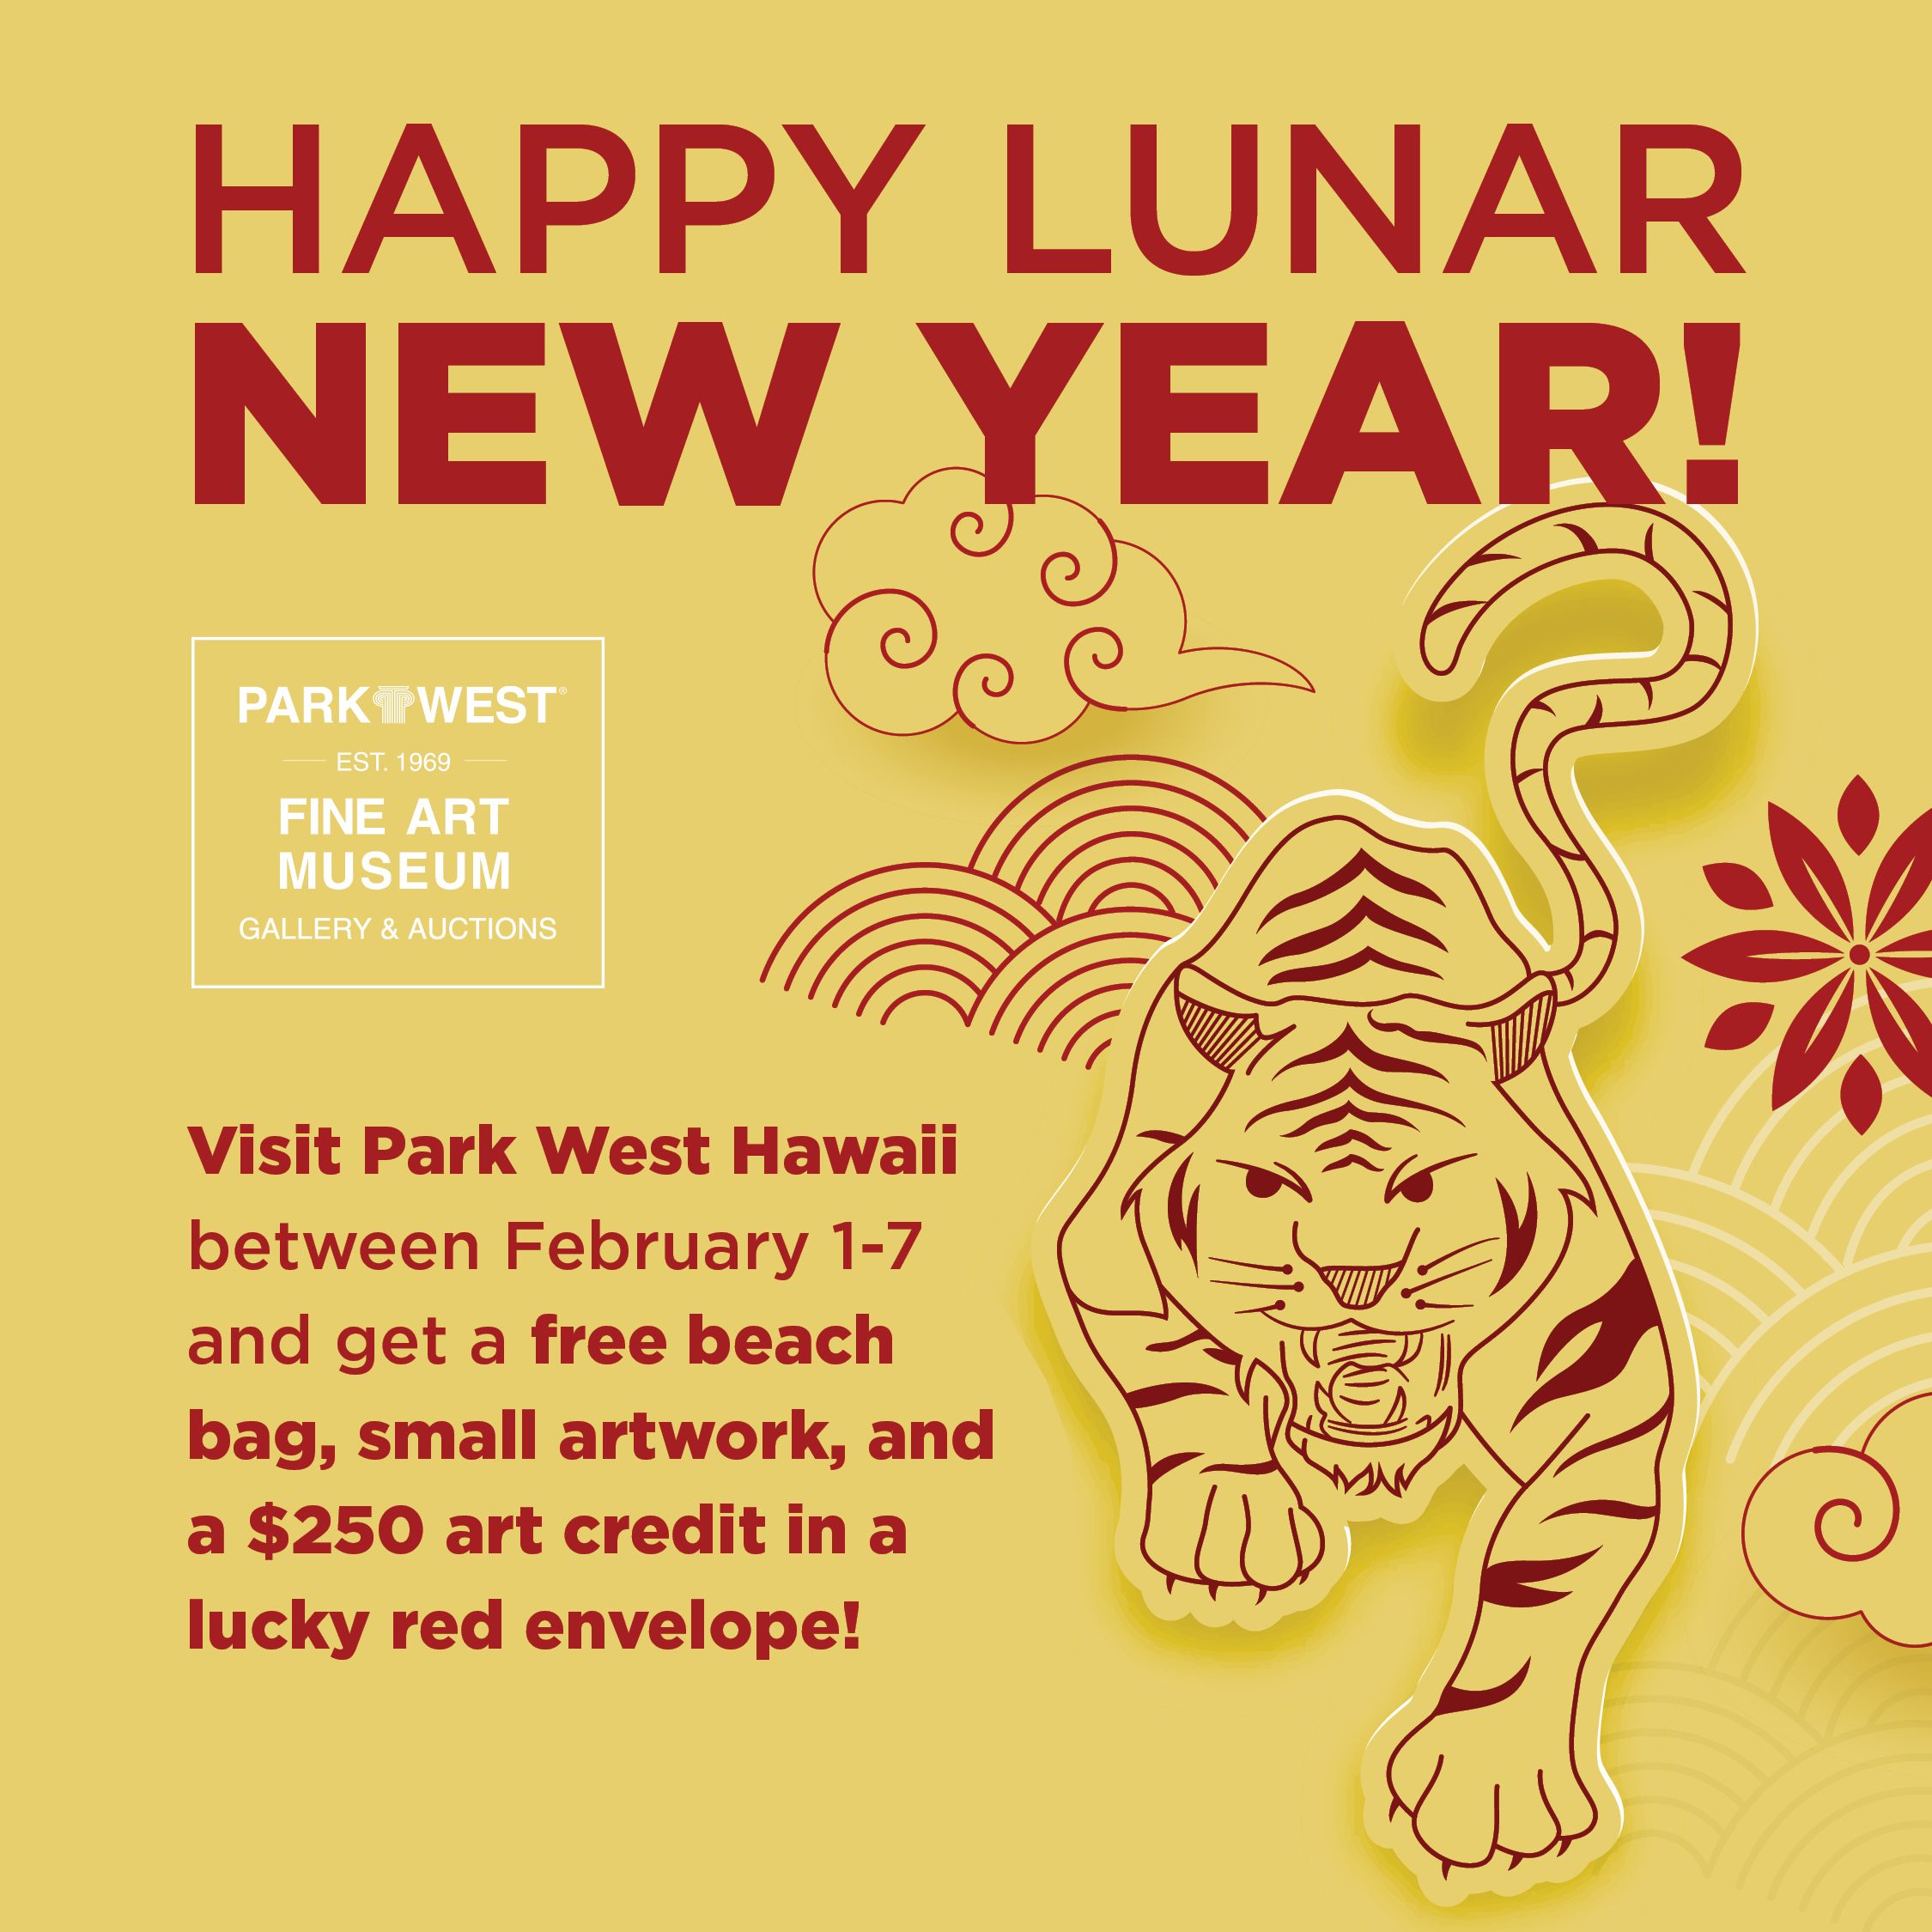 Yellow & red Happy Lunar New Year flyer saying "Visit Park West Hawaii between February 1-7 and get a free beach bag, small artwork, & a $250 art credit in a lucky red envelope." Sketches of a tiger, cloud, & flowers are to the right of the message.